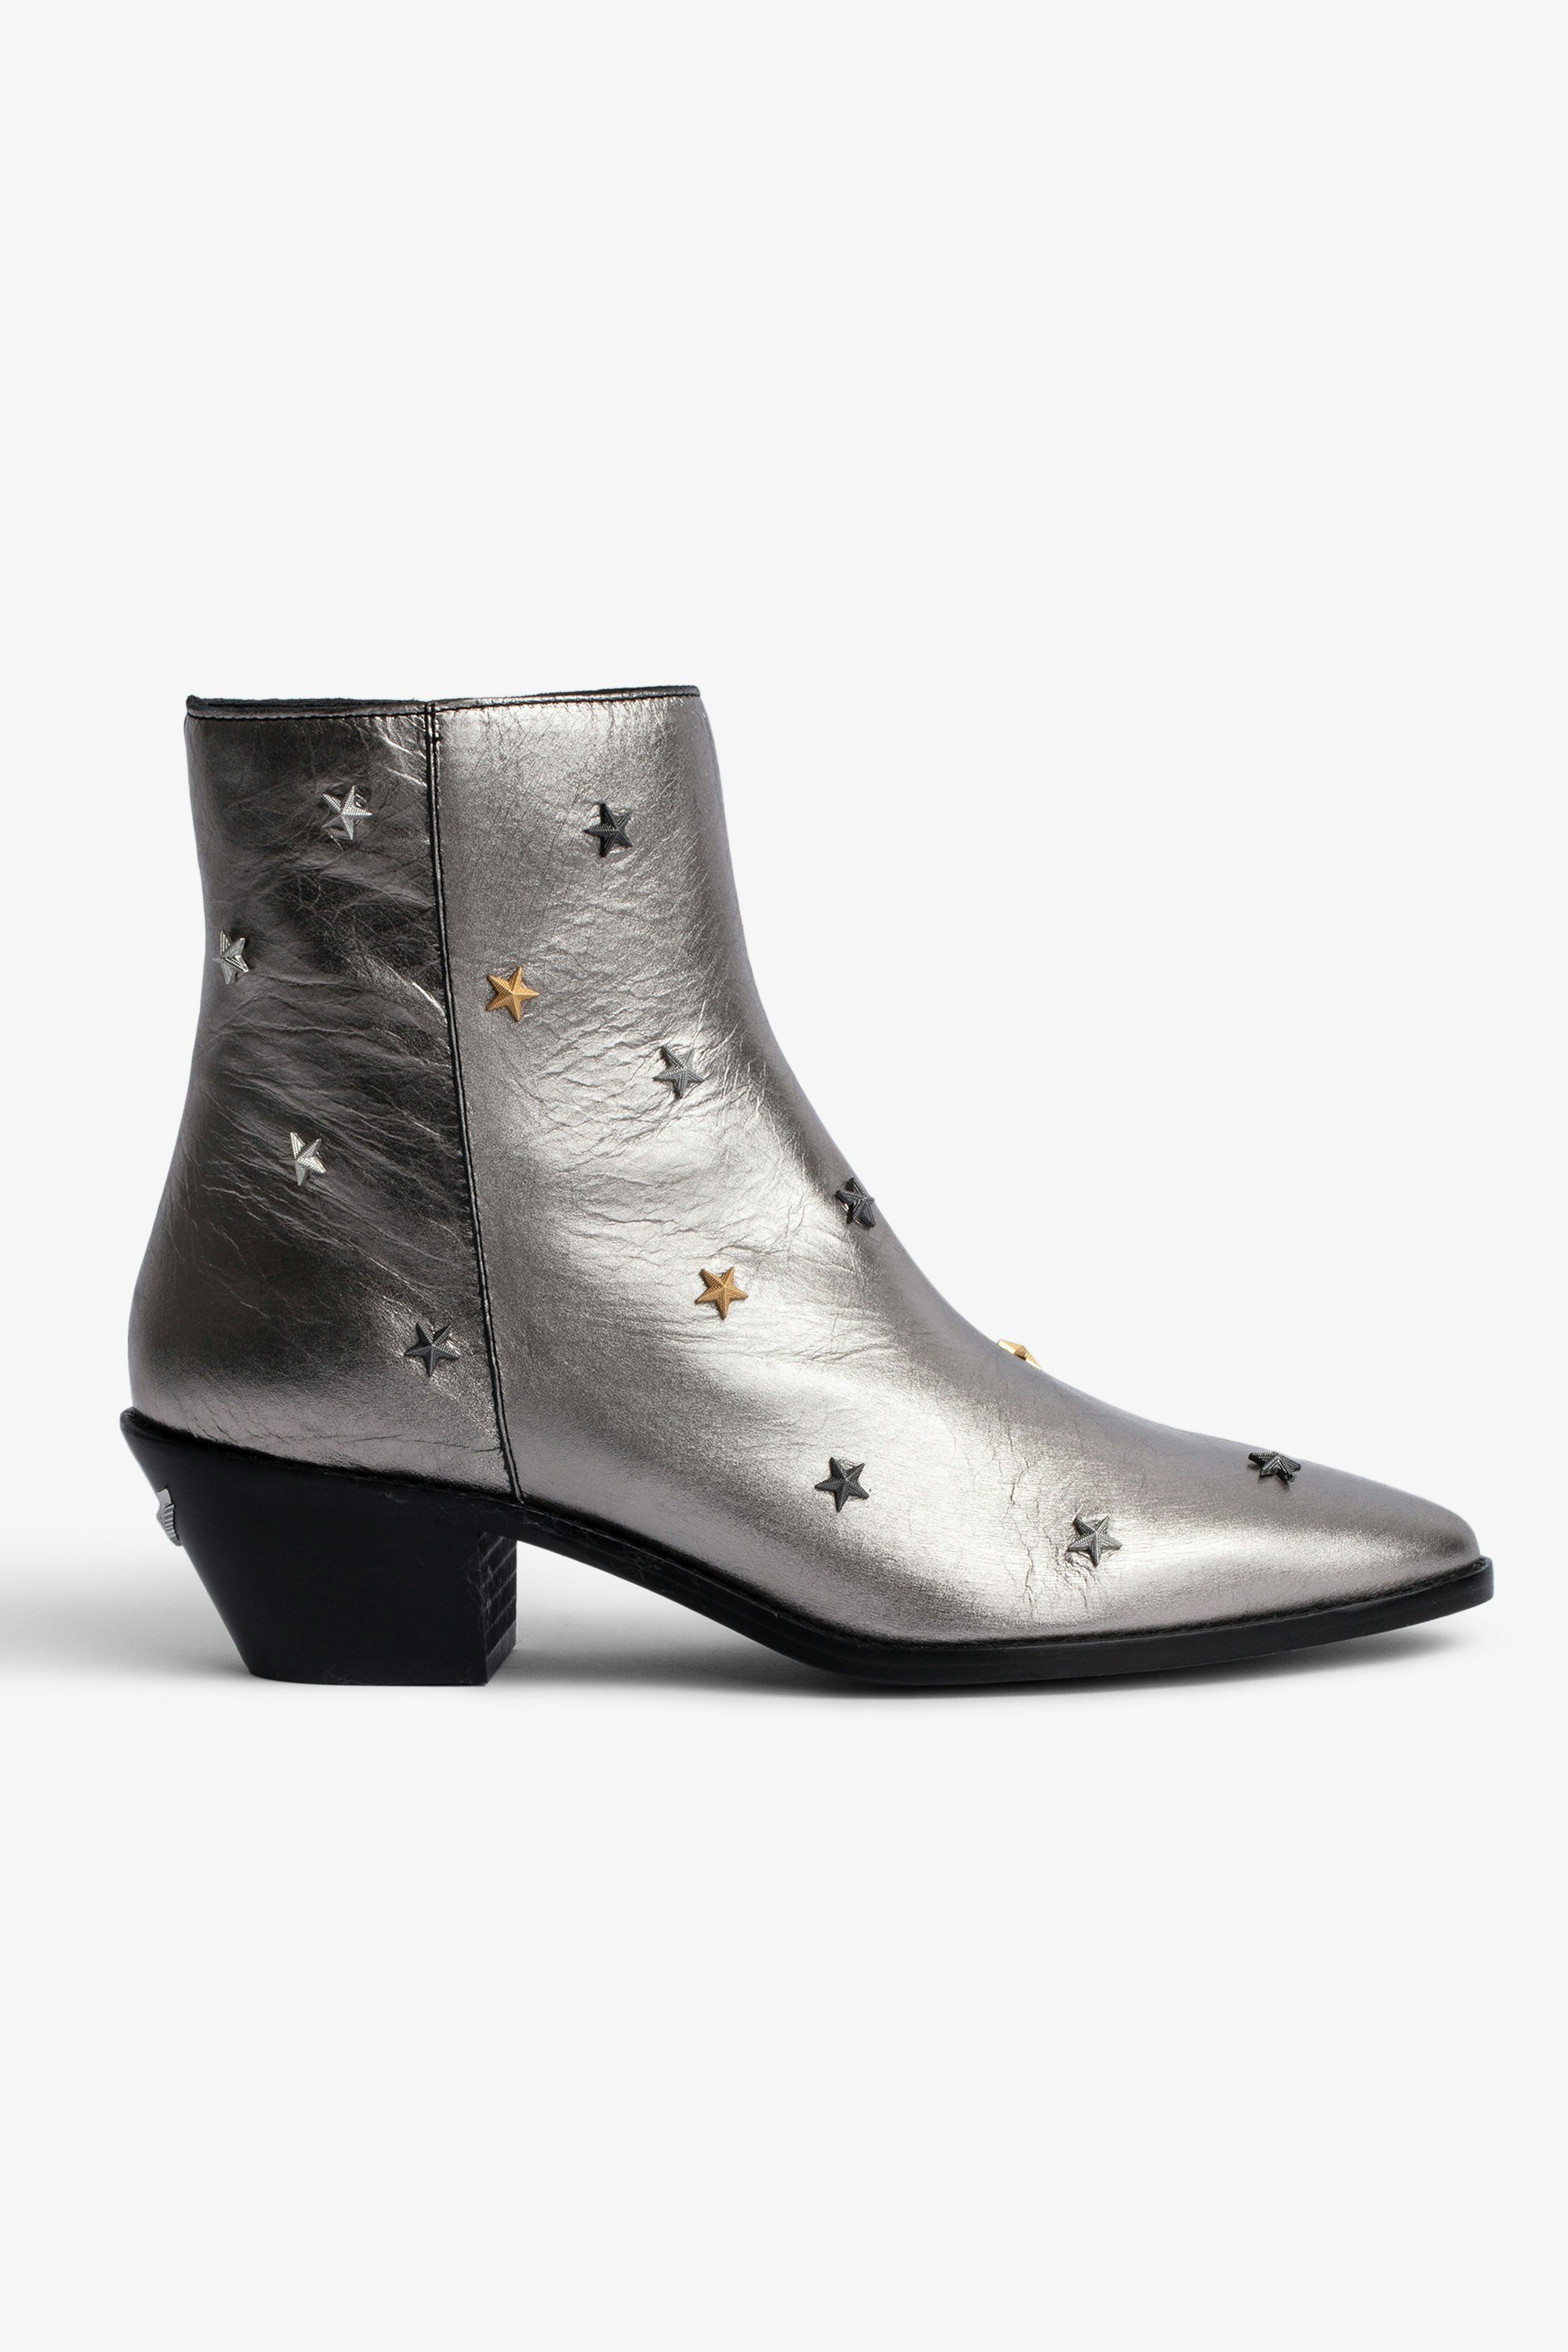 Tyler Vintage Ankle Boots - Women’s silver leather ankle boots with star studs